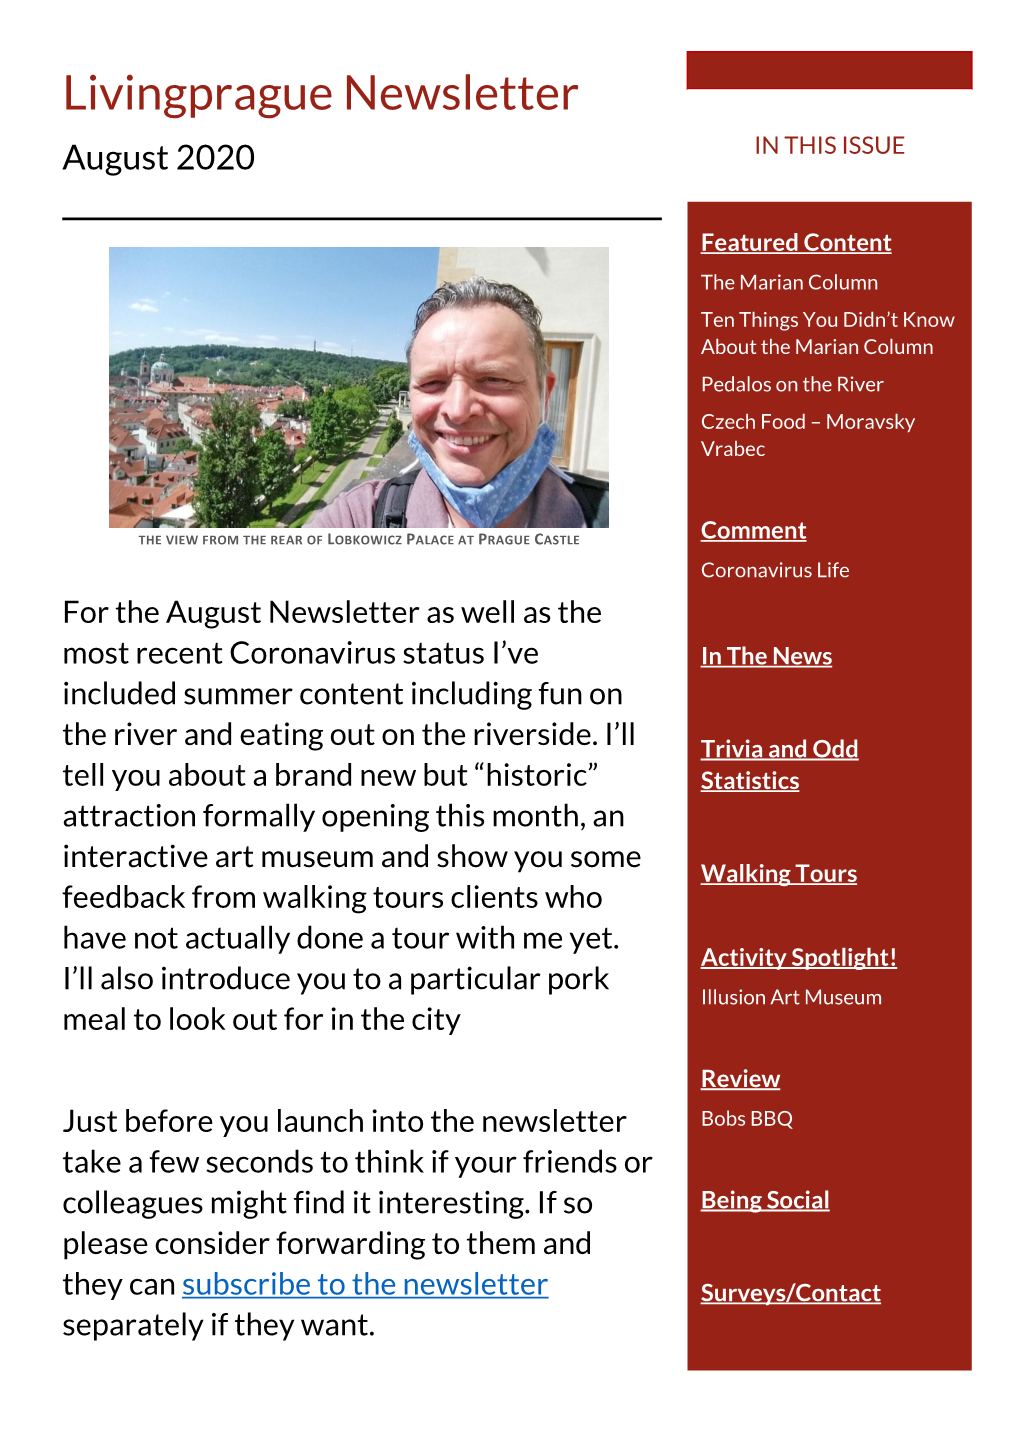 Livingprague Newsletter August 2020 in THIS ISSUE